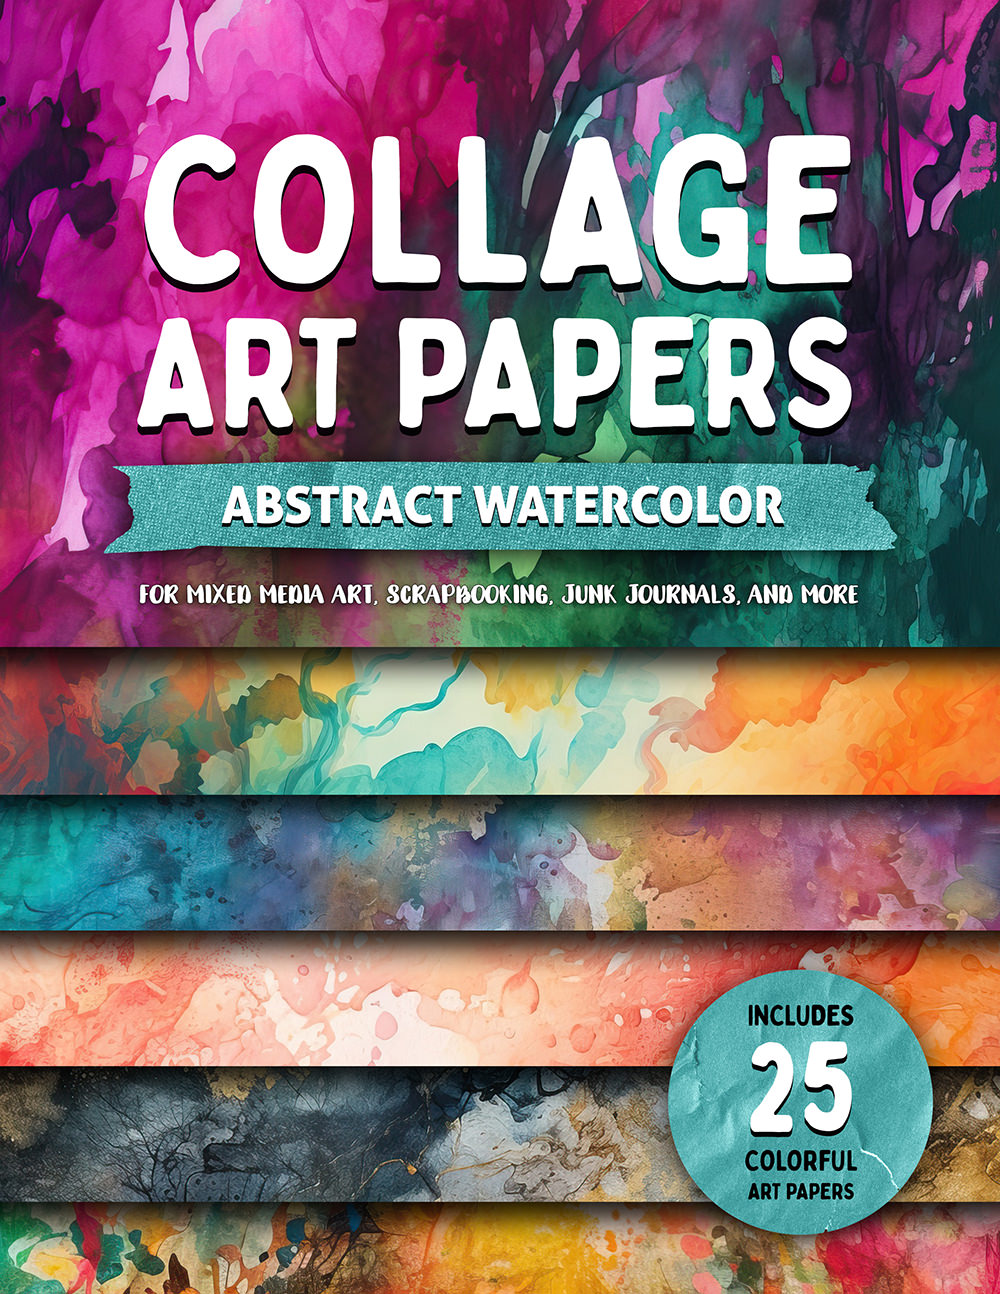 Collage Art Papers: Abstract Watercolor